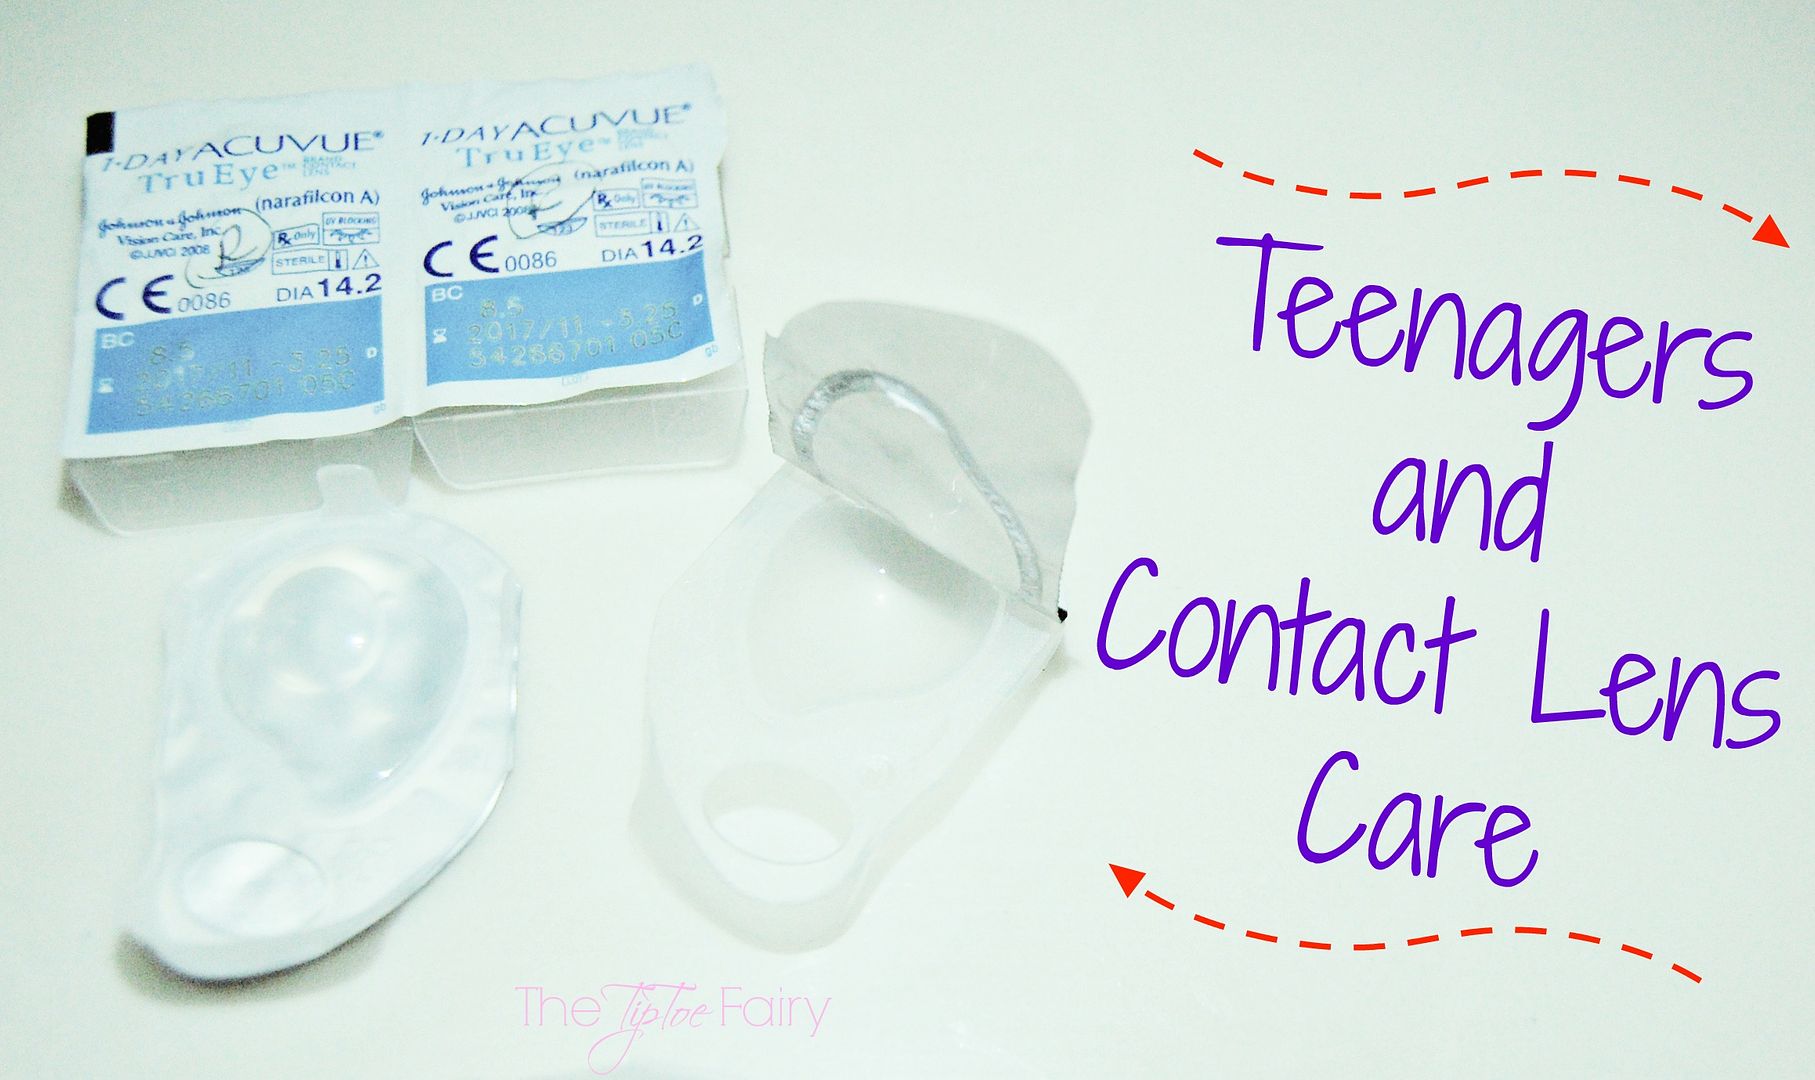 Do's & Don'ts of Contact Lens Care | The TipToe Fairy #contacts #contactlenscare #halloween #cosmeticcontacts